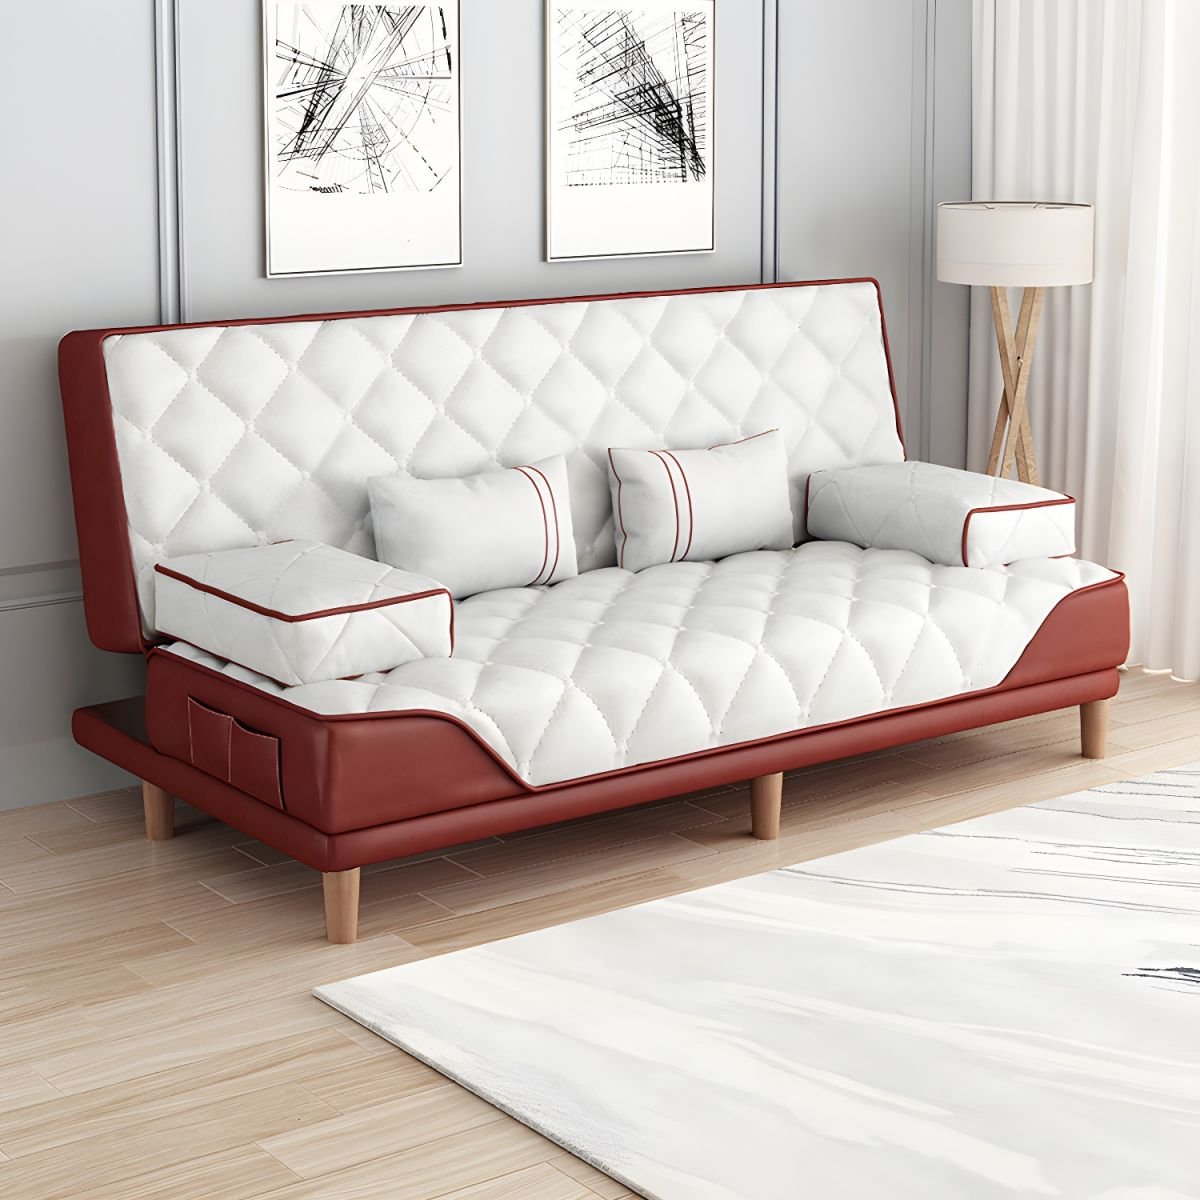 Contemporary Tight Back Convertible Sofa and Chaise with Pillow Top Arm - 47"L x 30"W x 34"H Red-White Tech Cloth